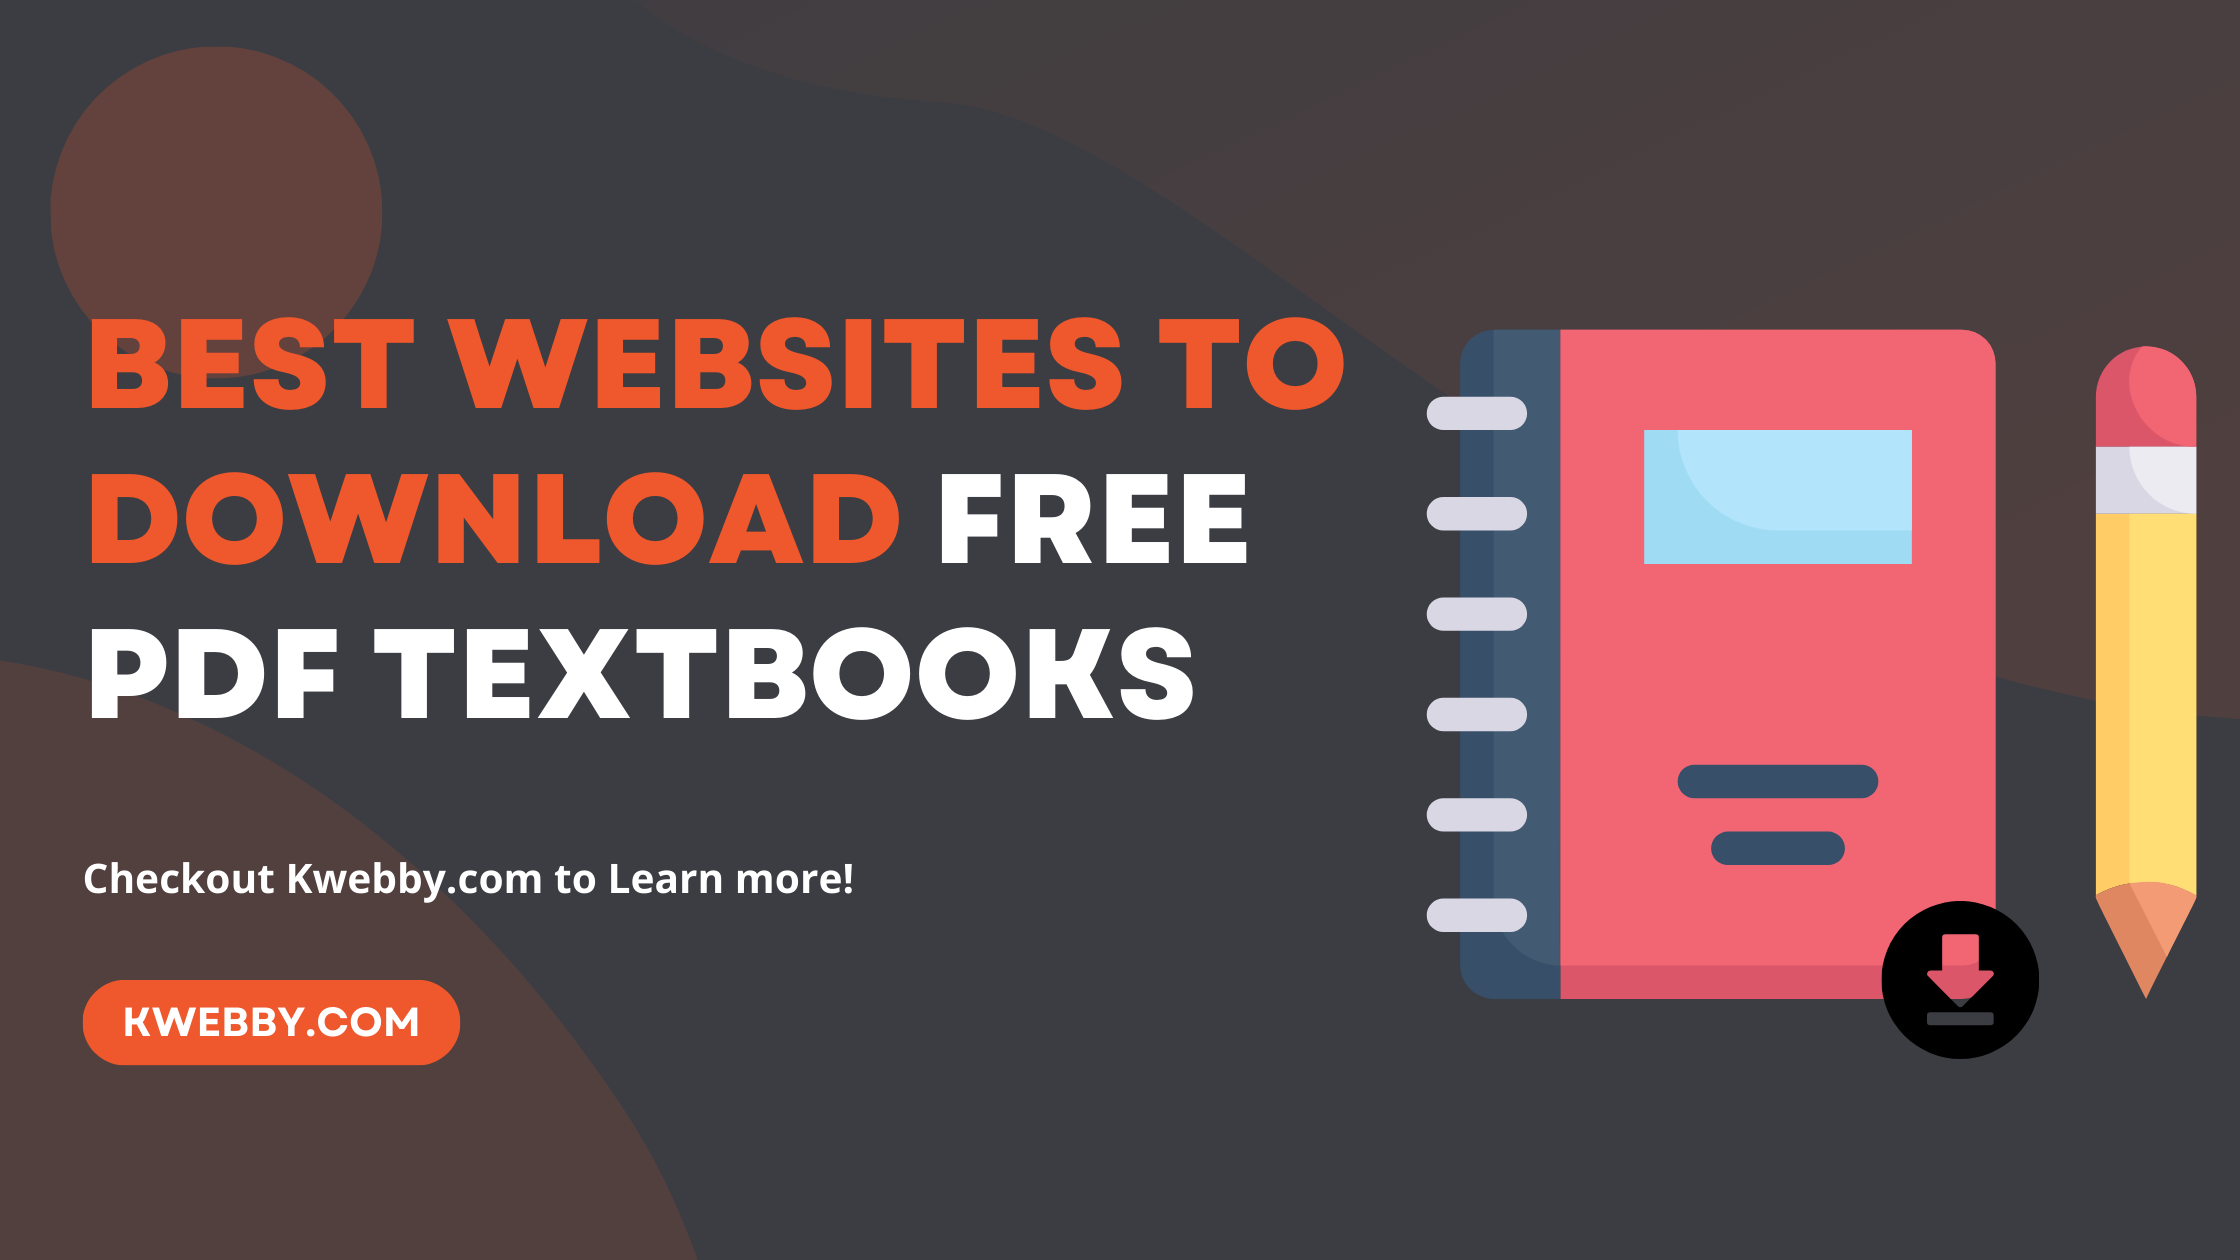 Best Websites To Download Free PDF Textbooks